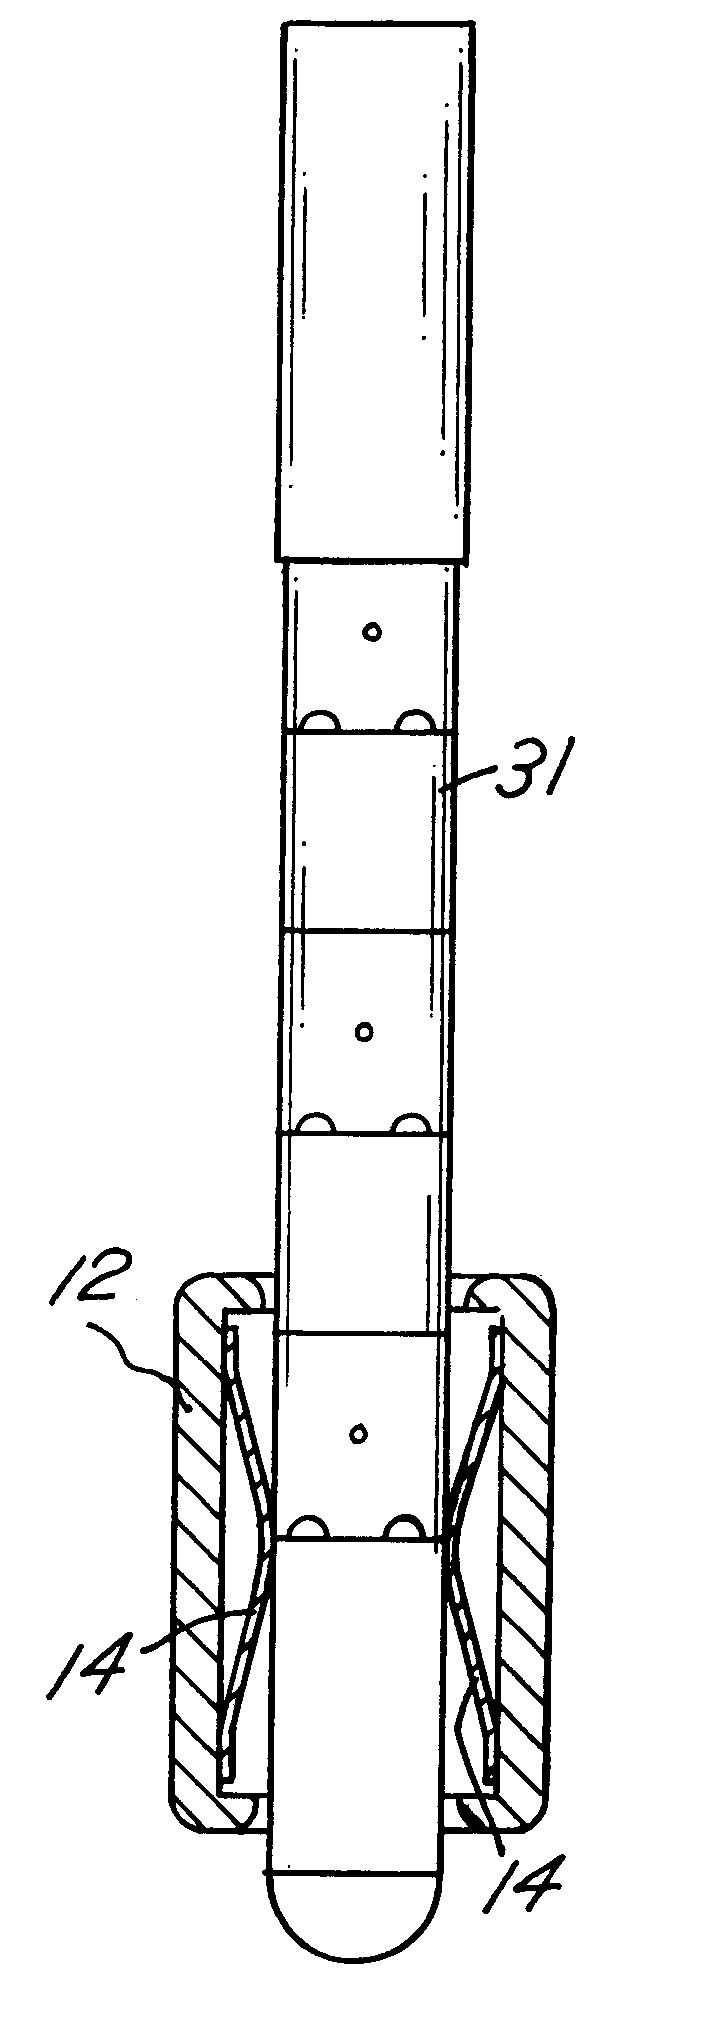 Medical lead positioning and anchoring system